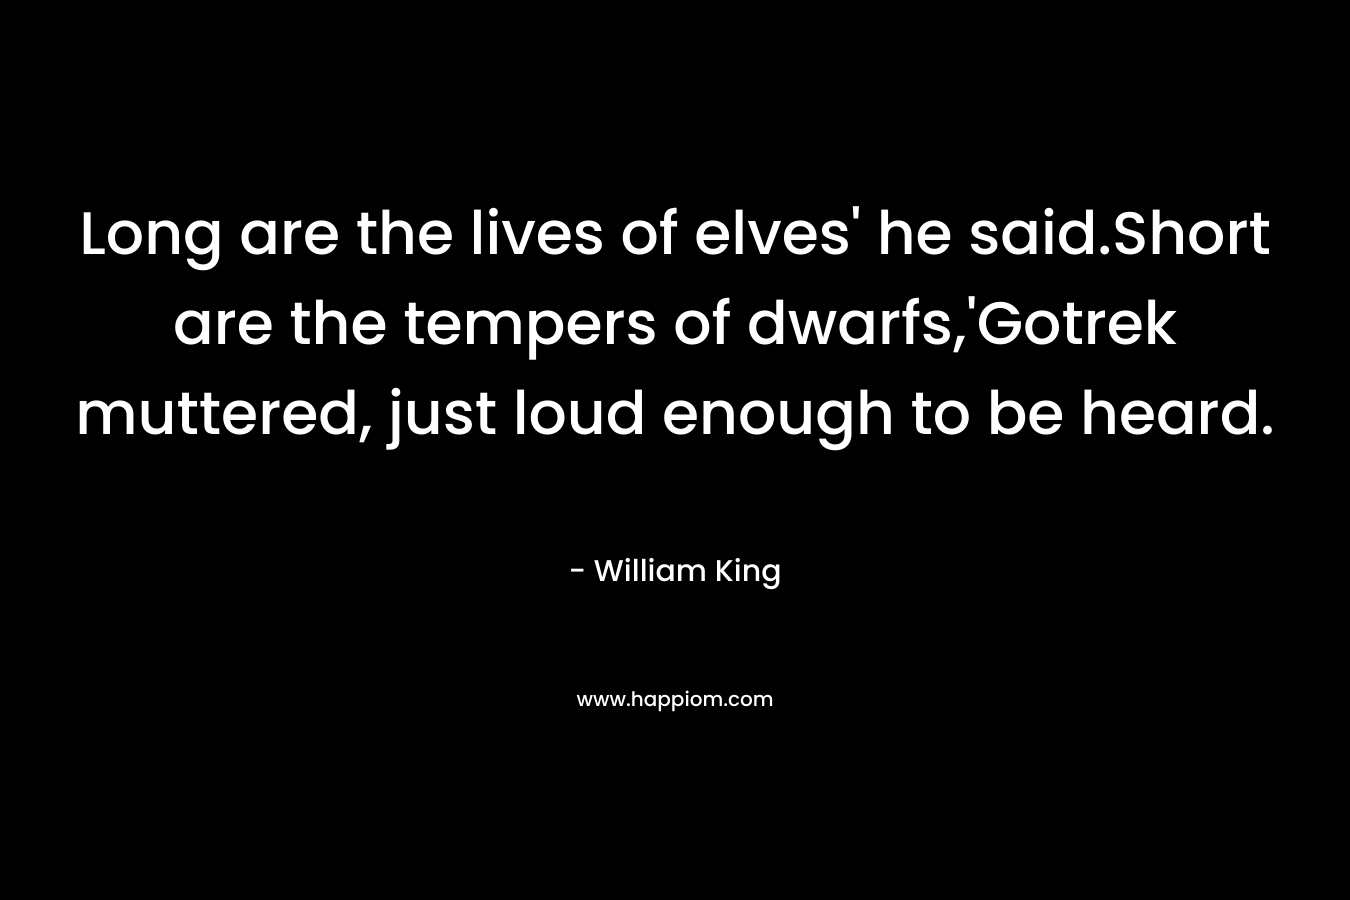 Long are the lives of elves’ he said.Short are the tempers of dwarfs,’Gotrek muttered, just loud enough to be heard. – William King